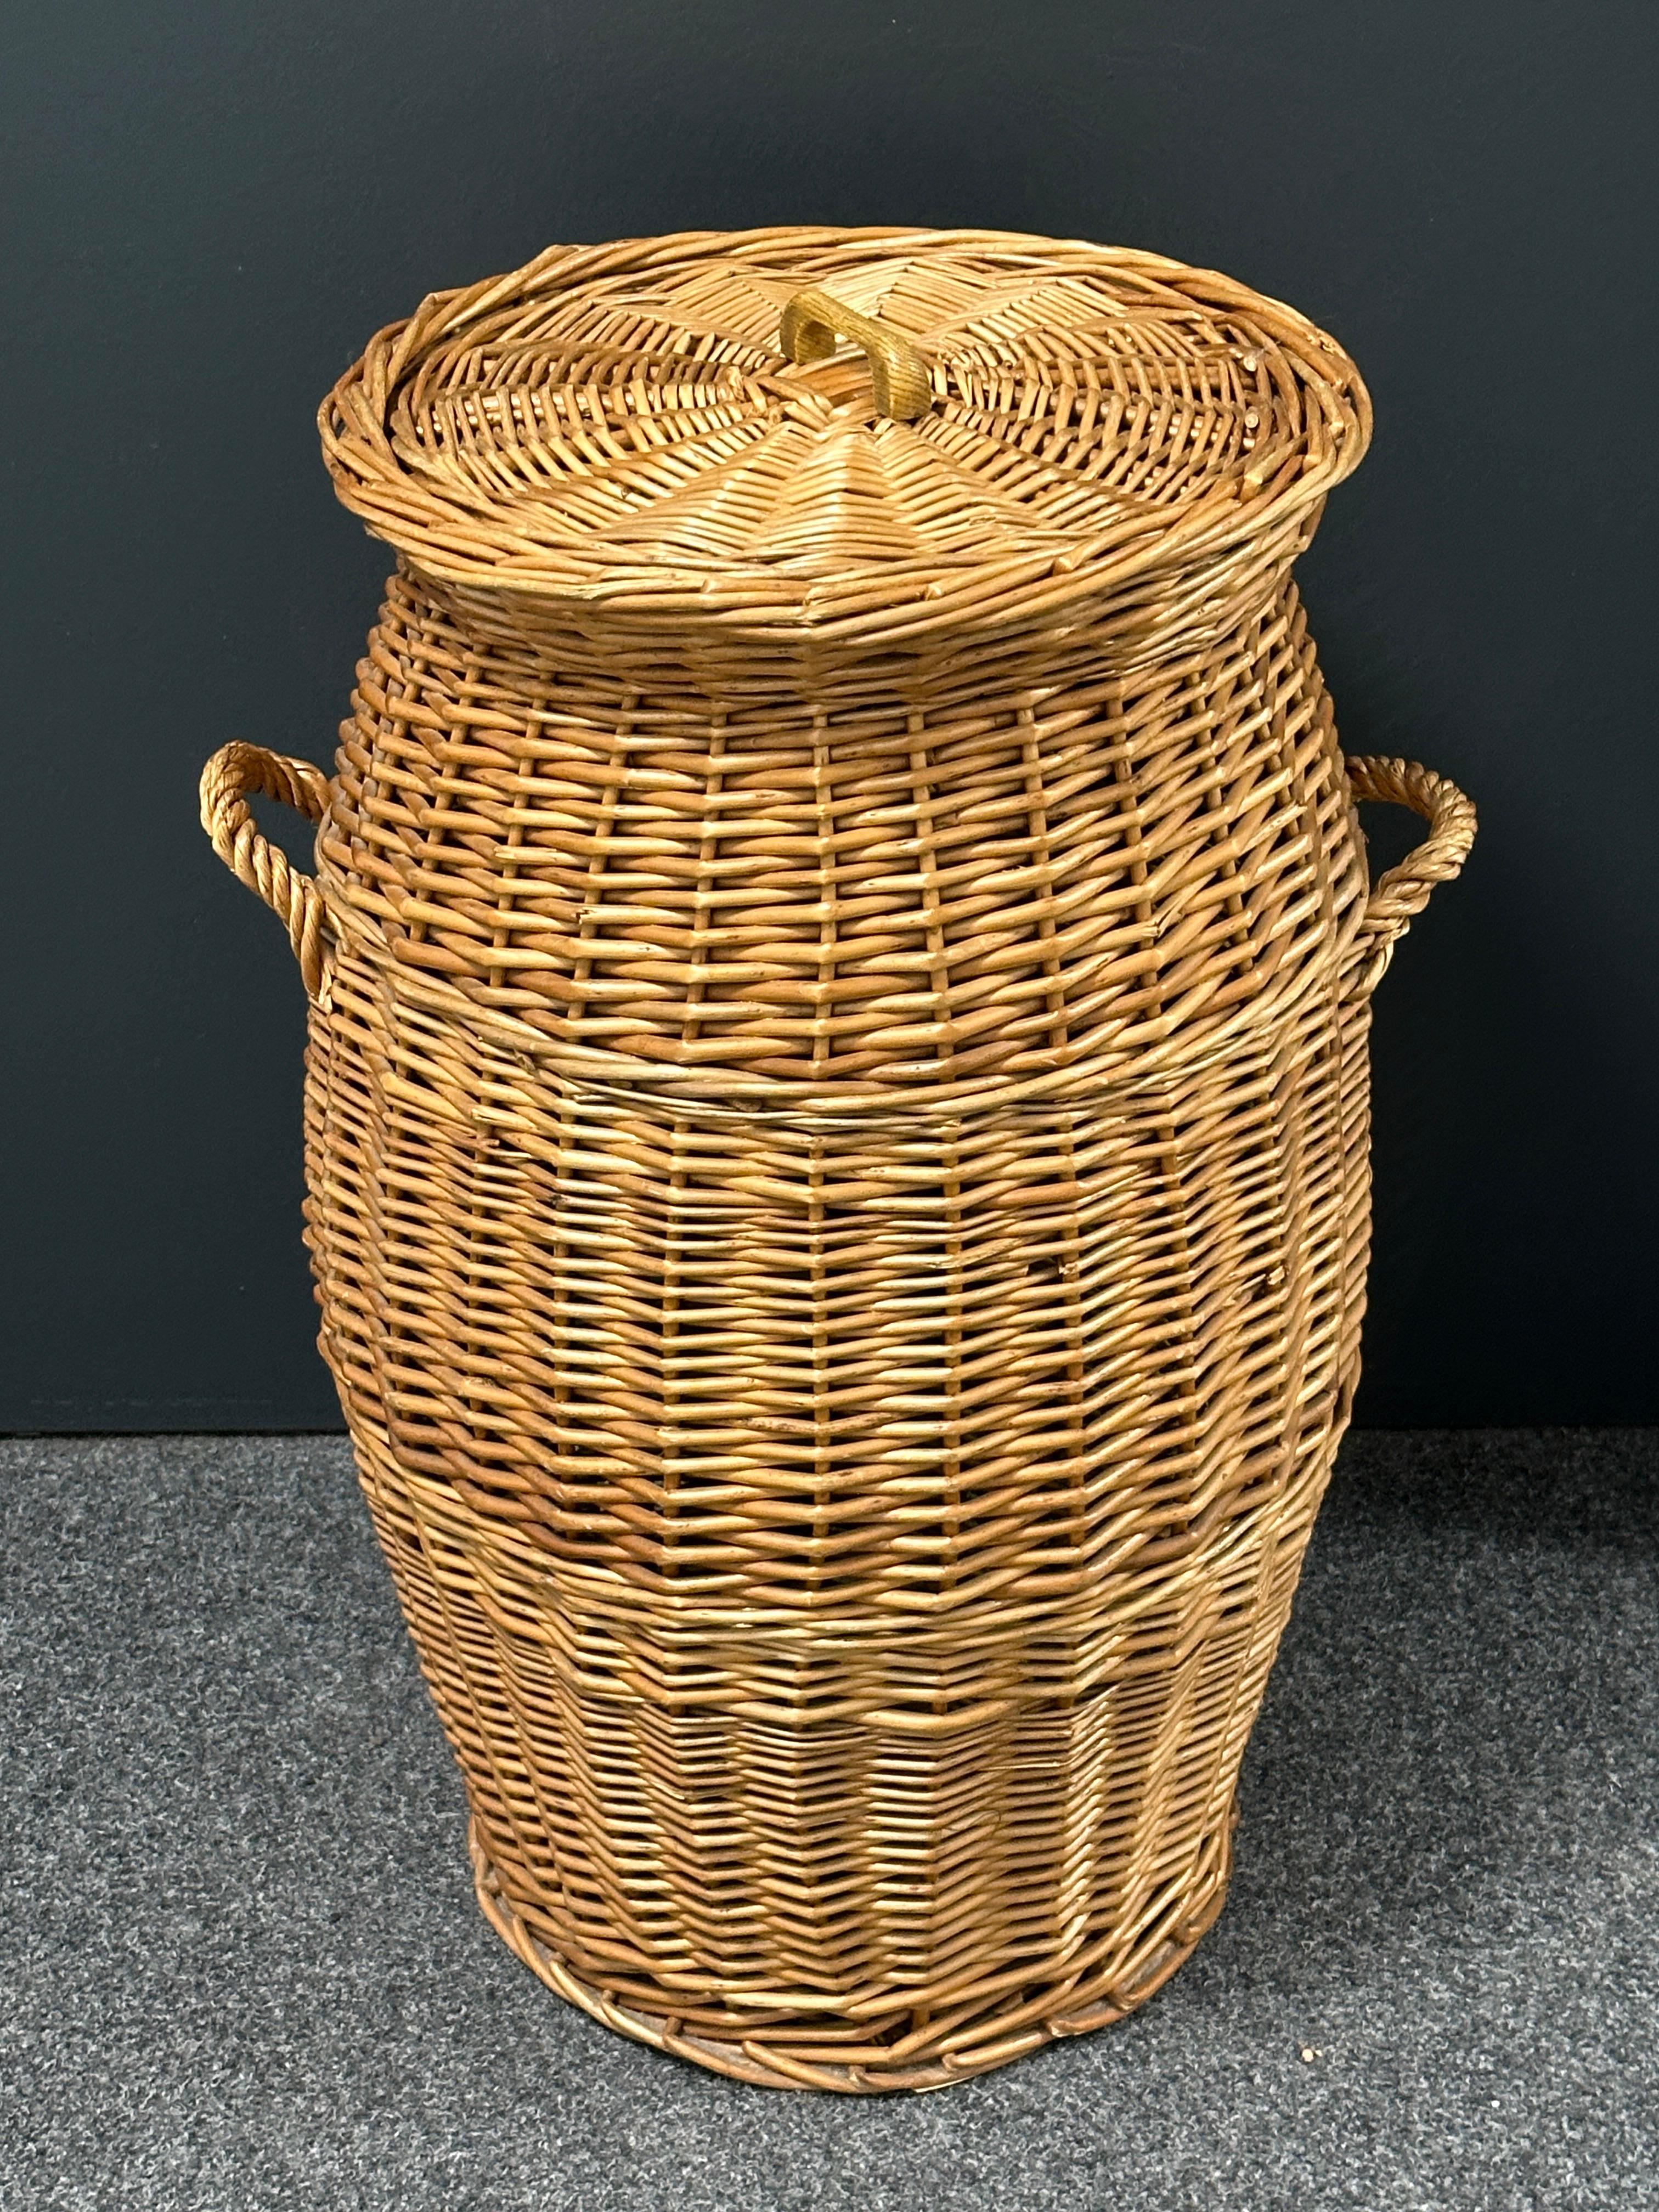 Offered is an absolutely stunning large 1970s vintage wicker laundry basket hamper with lid and wicker handles. Overall very good vintage condition with light ware consistent with age and use. Found at an Estate Sale in Nuremberg, Germany. A nice